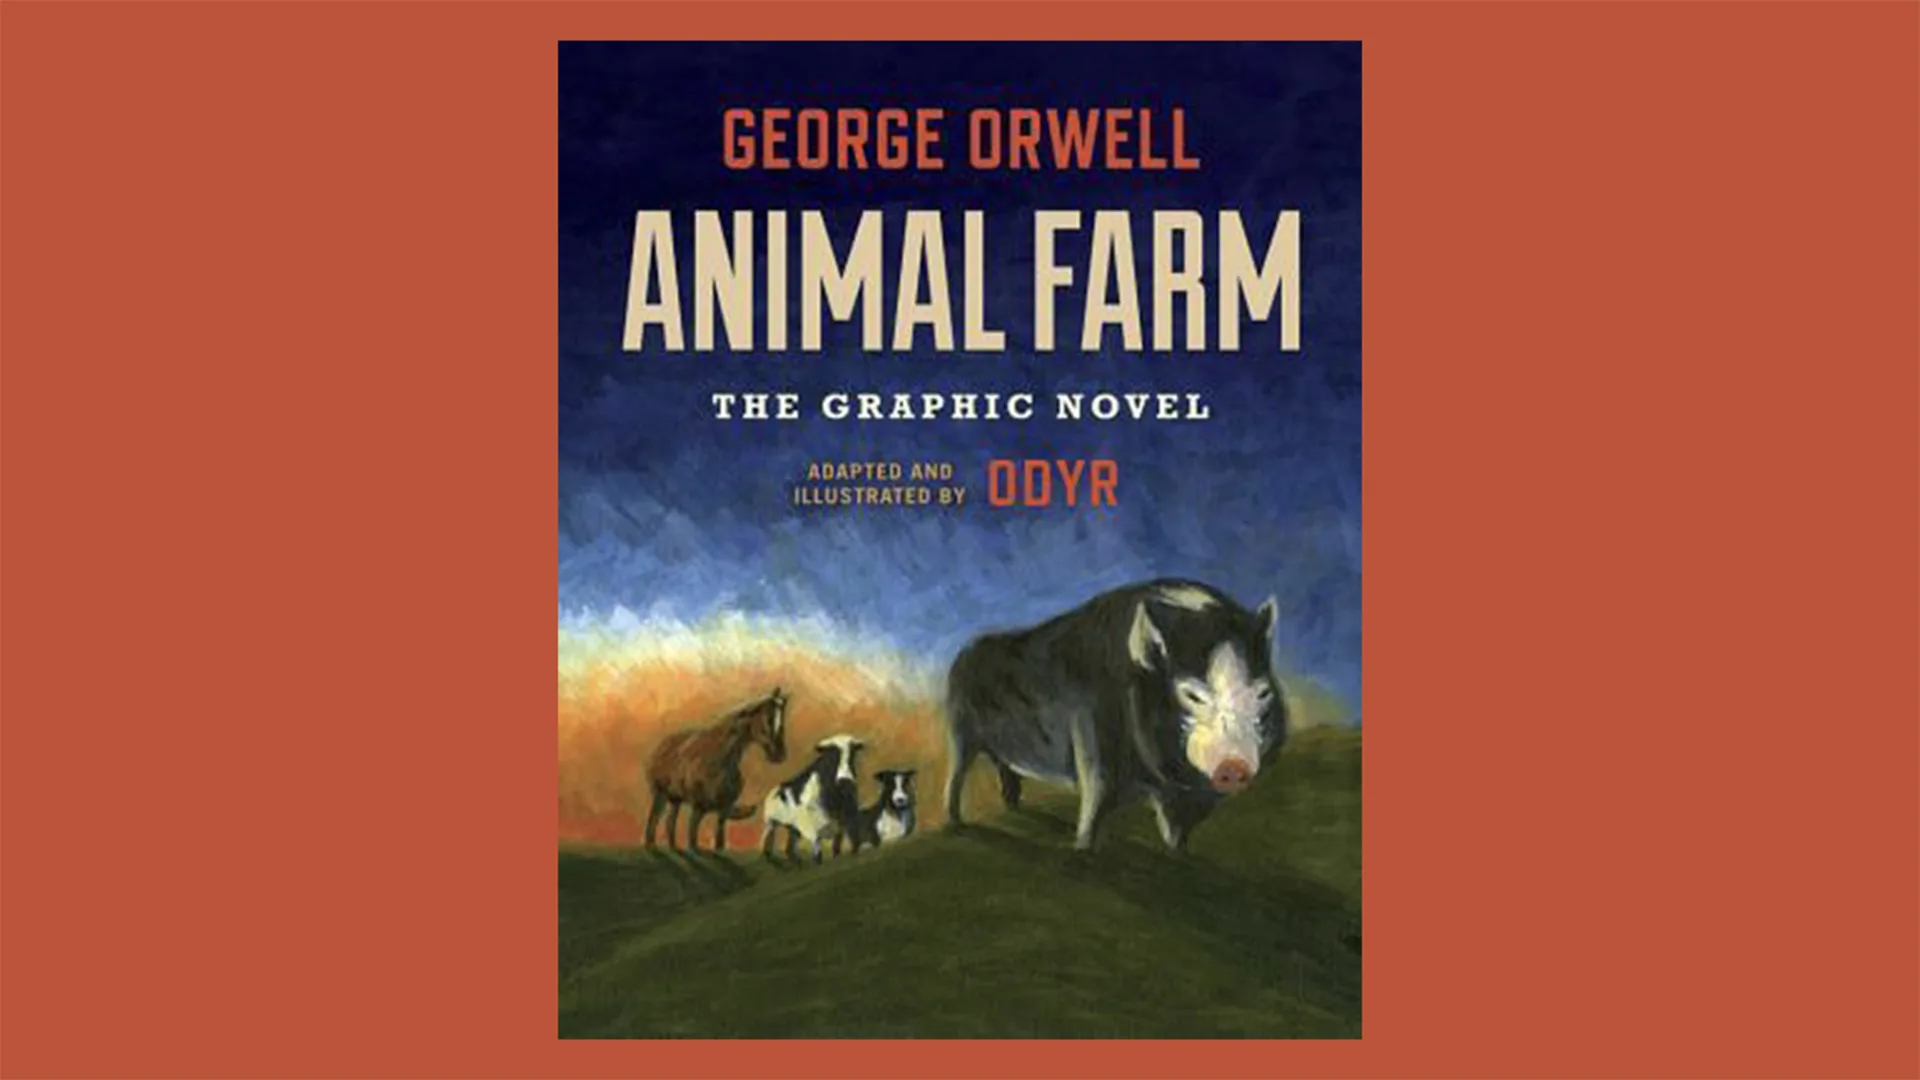 The graphic novel book cover of Animal Farm